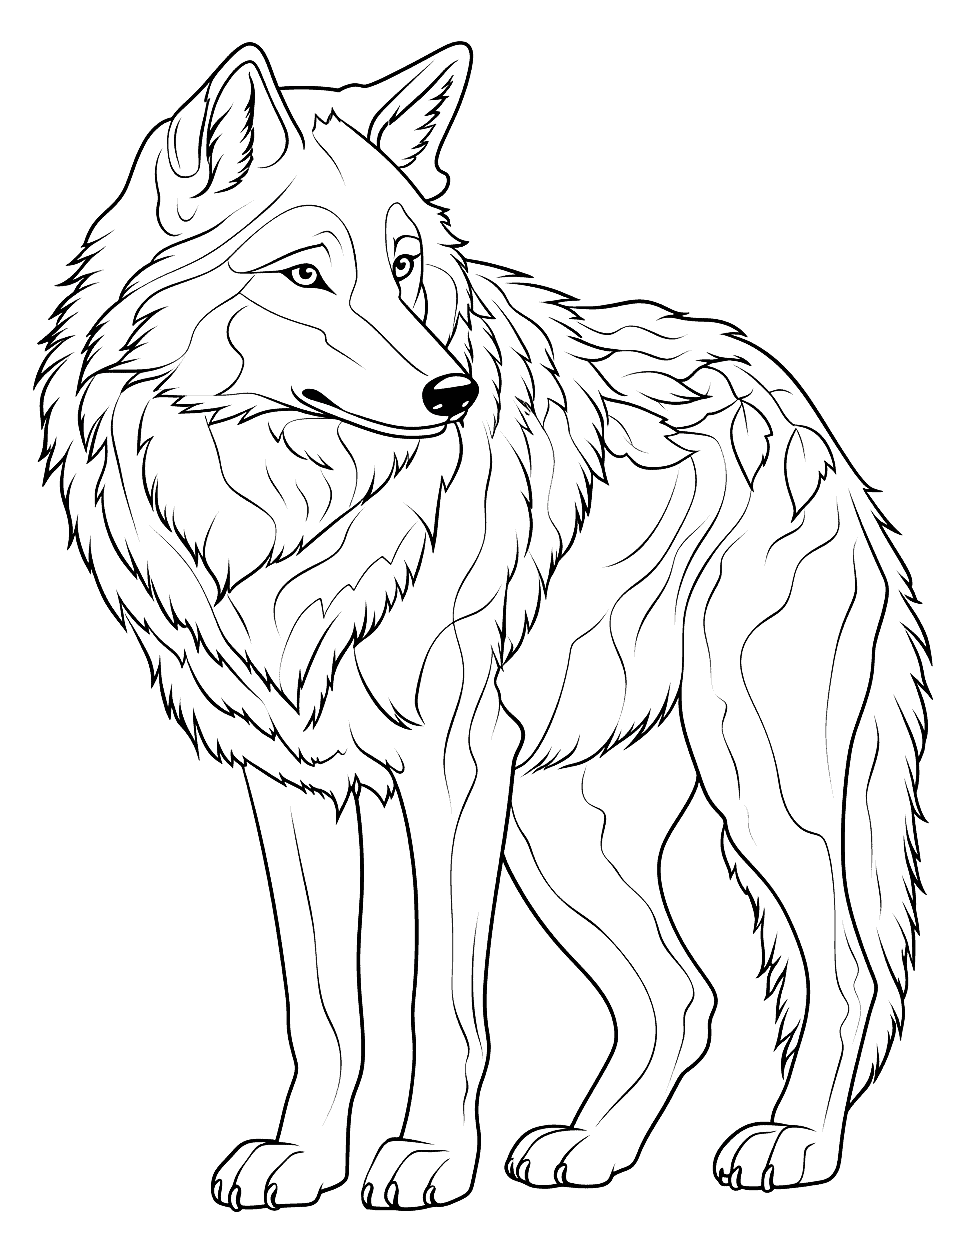 Rainforest Wolf Coloring Page - A wolf with vibrant colors and patterns, reminiscent of rainforest flora and fauna.